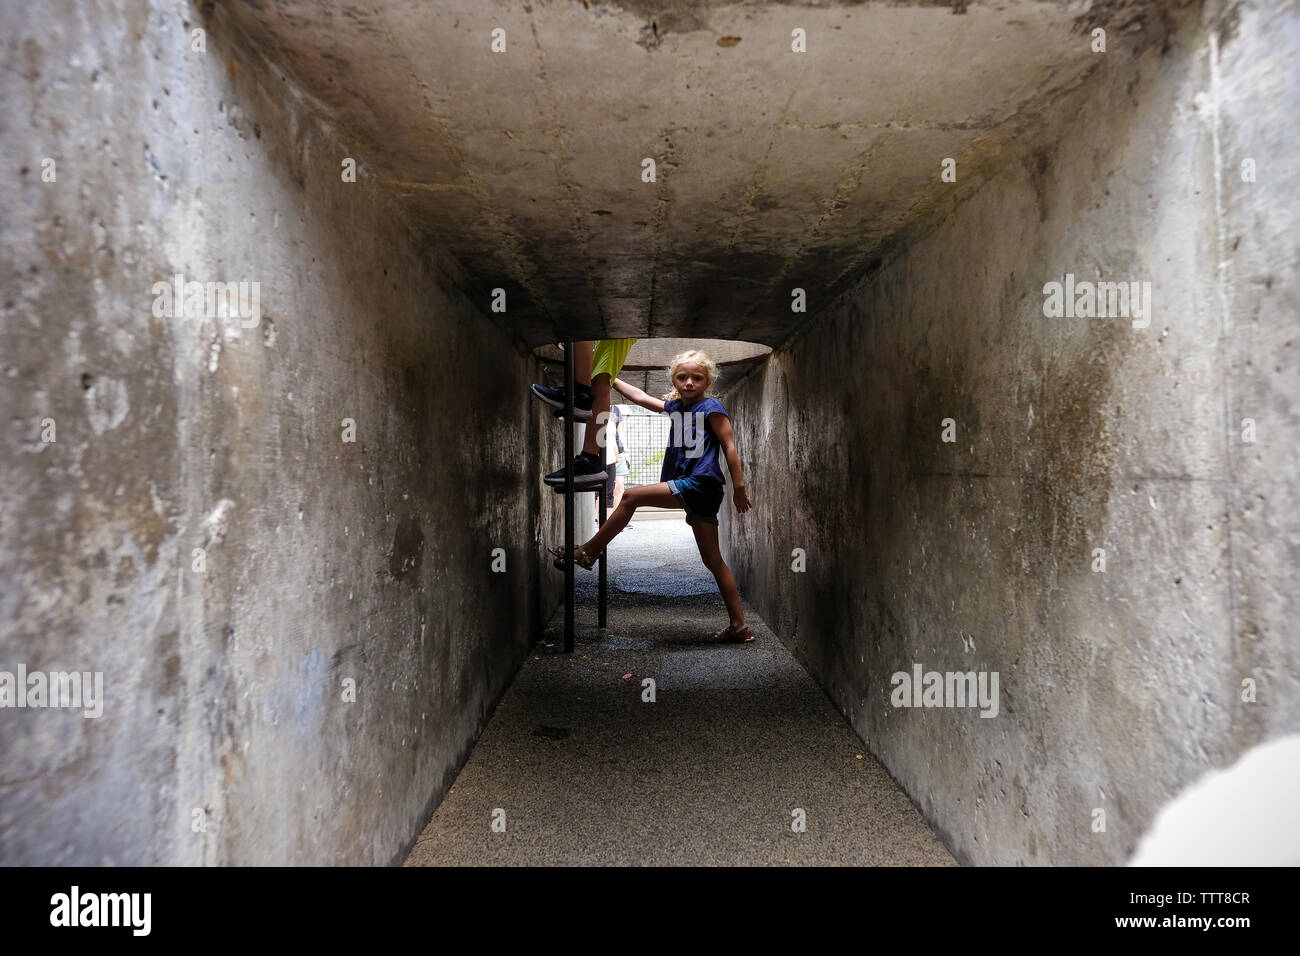 girl in tunnel waiting to climb stairs Stock Photo